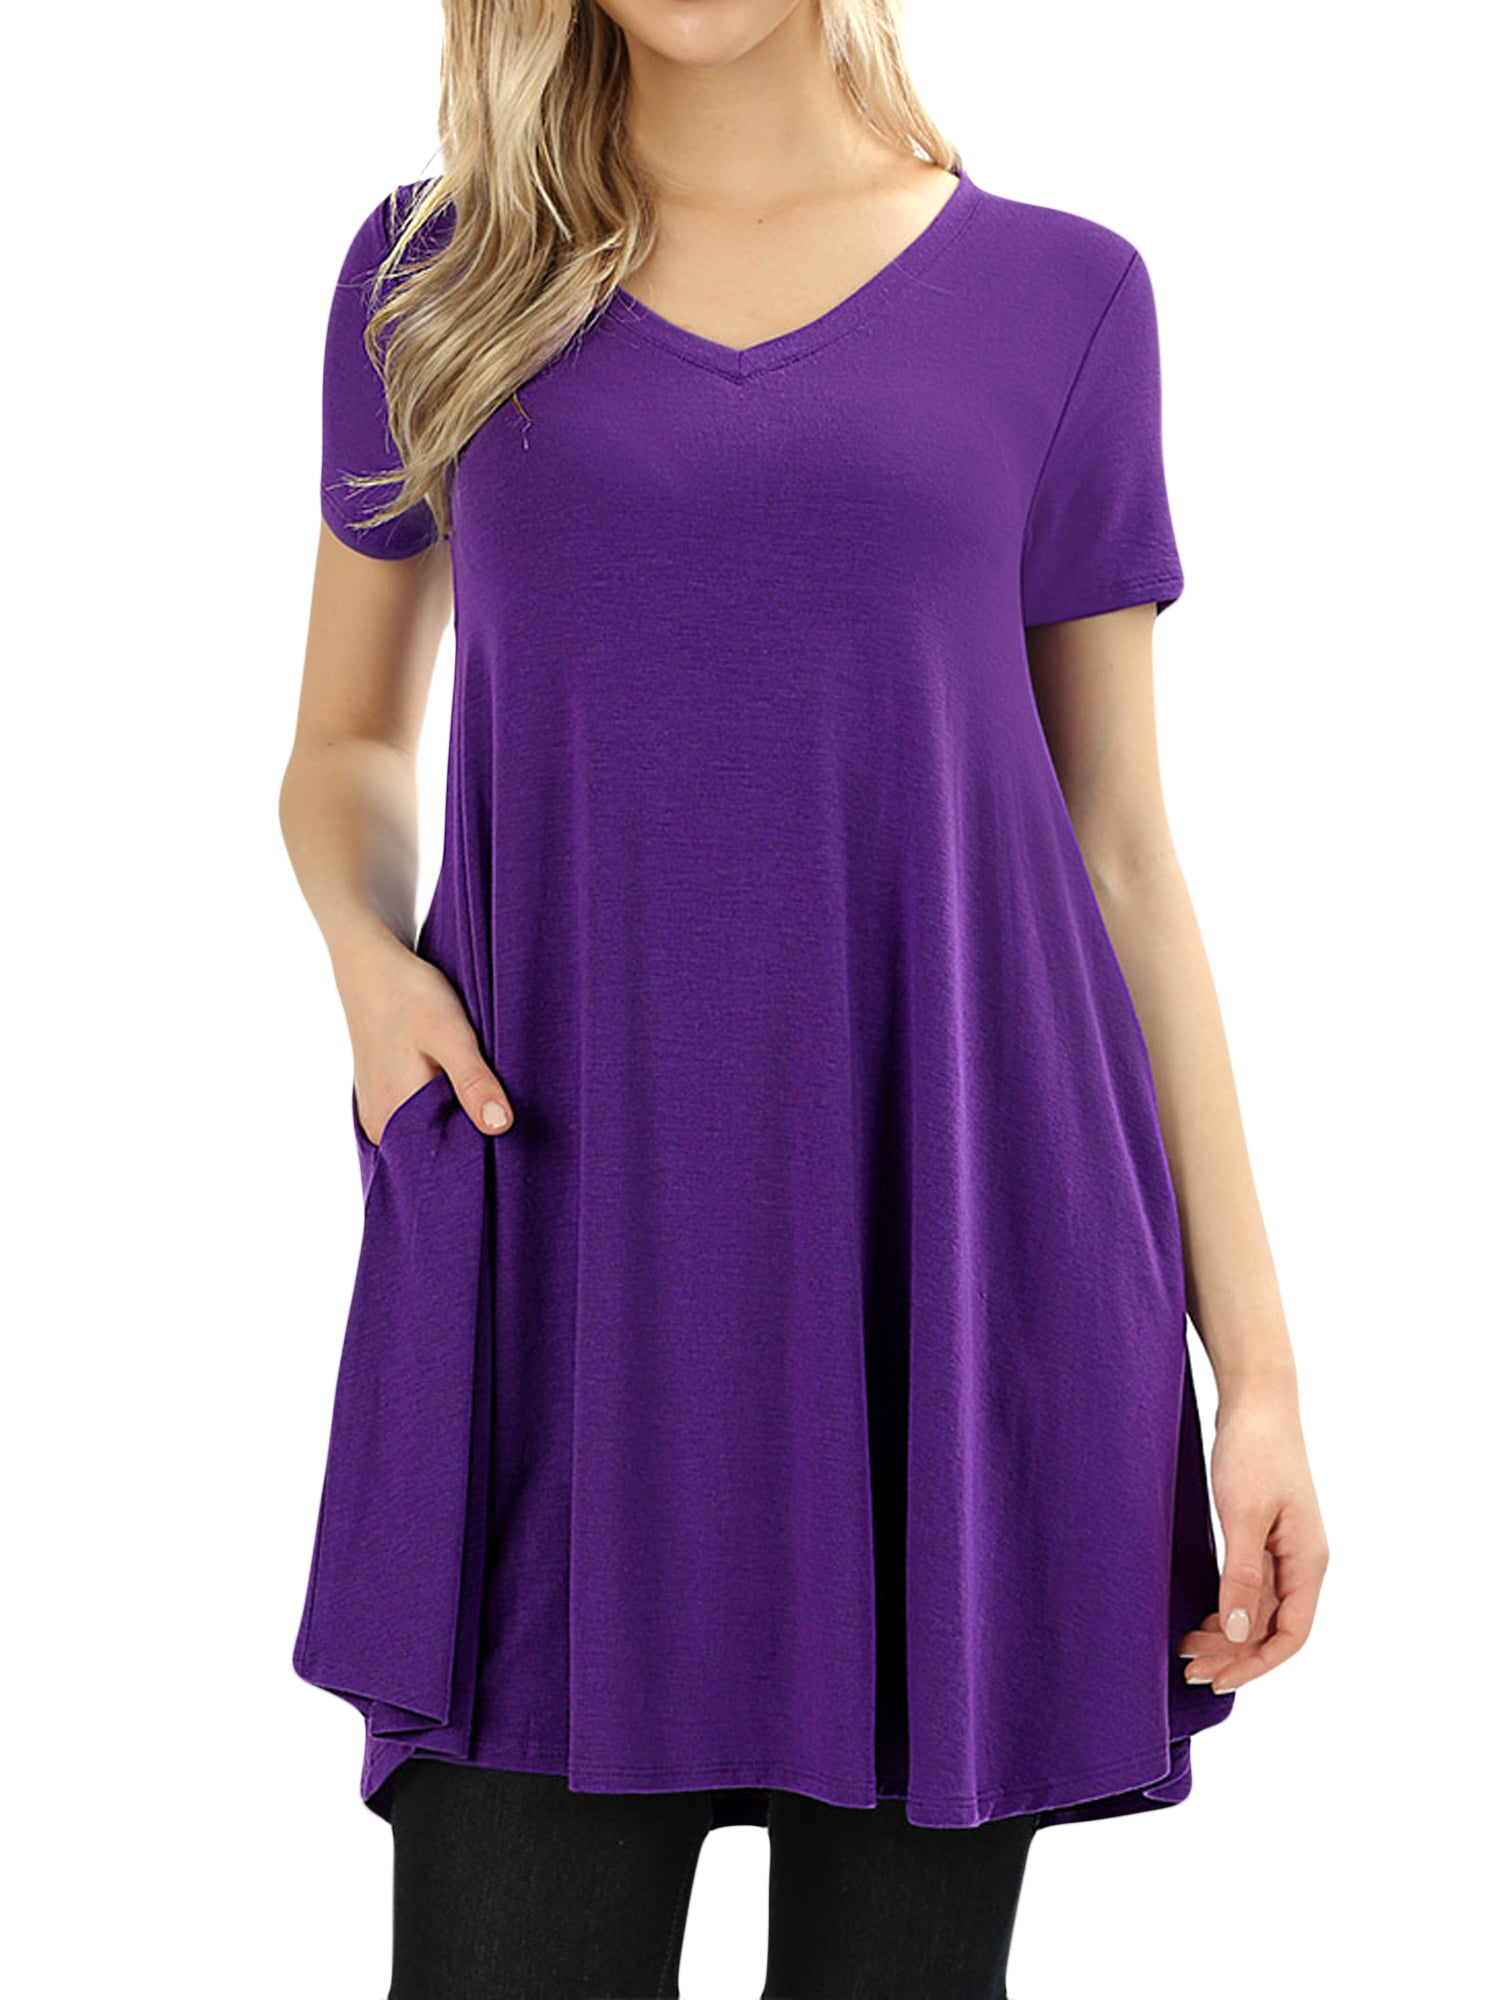 Women V-neck Short Sleeve Round Hem Flowy A-Line Tunic Top with Side ...